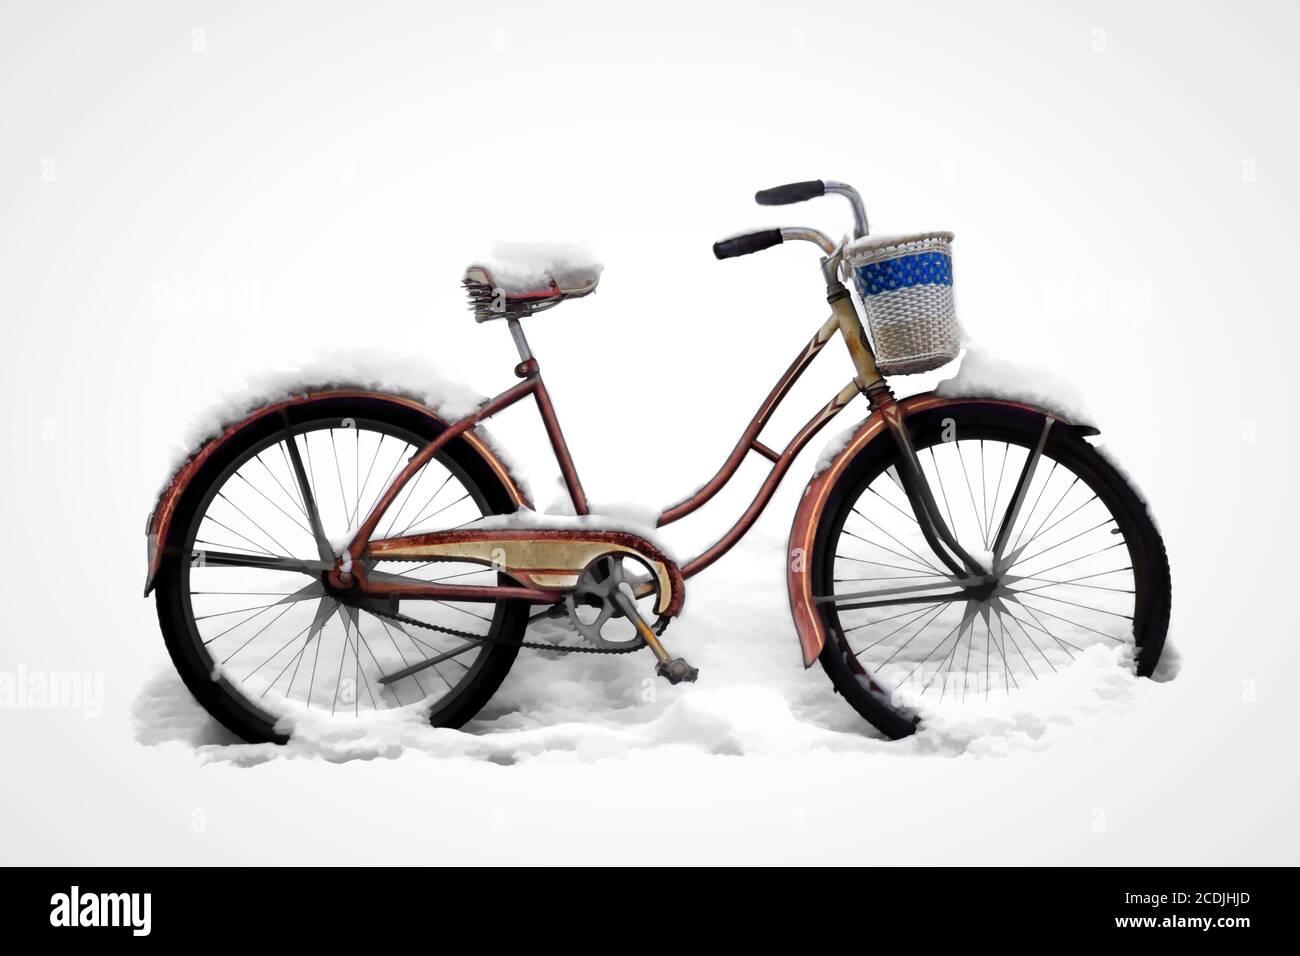 Old Bicycle Parked in Snow Stock Photo